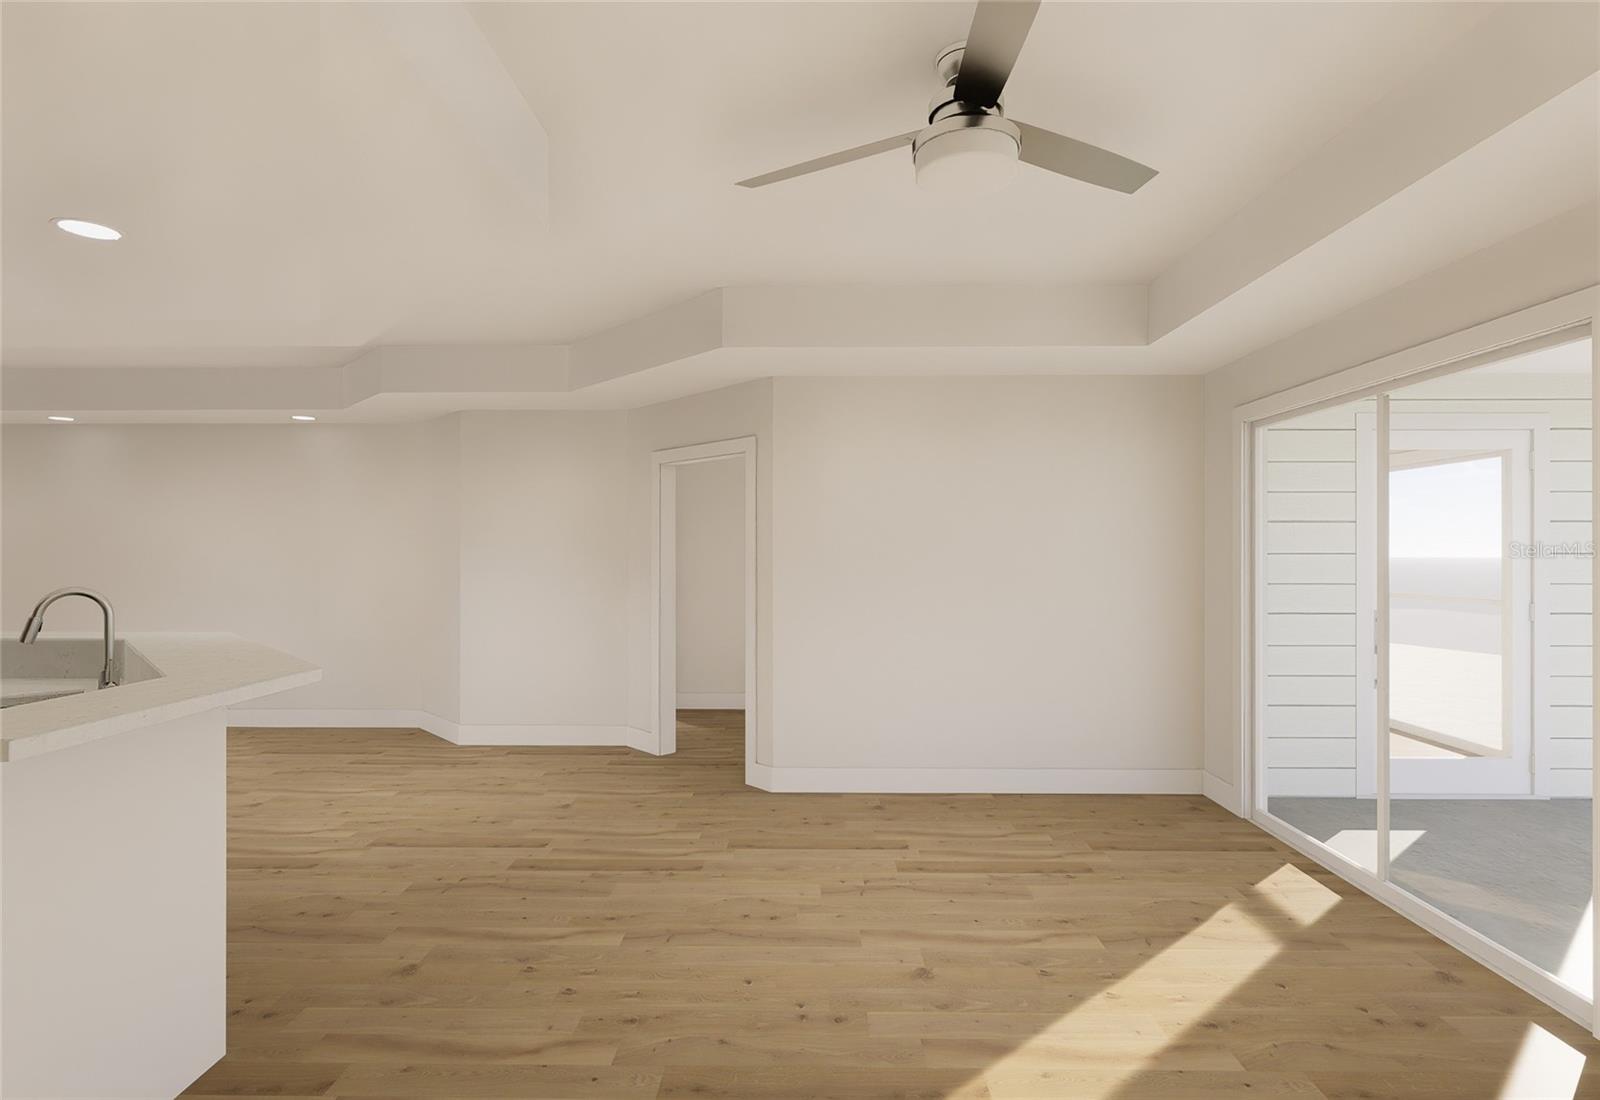 *Rendering Example**Unit does not come with physical ceiling fans, furniture, and washer/dryer appliances.